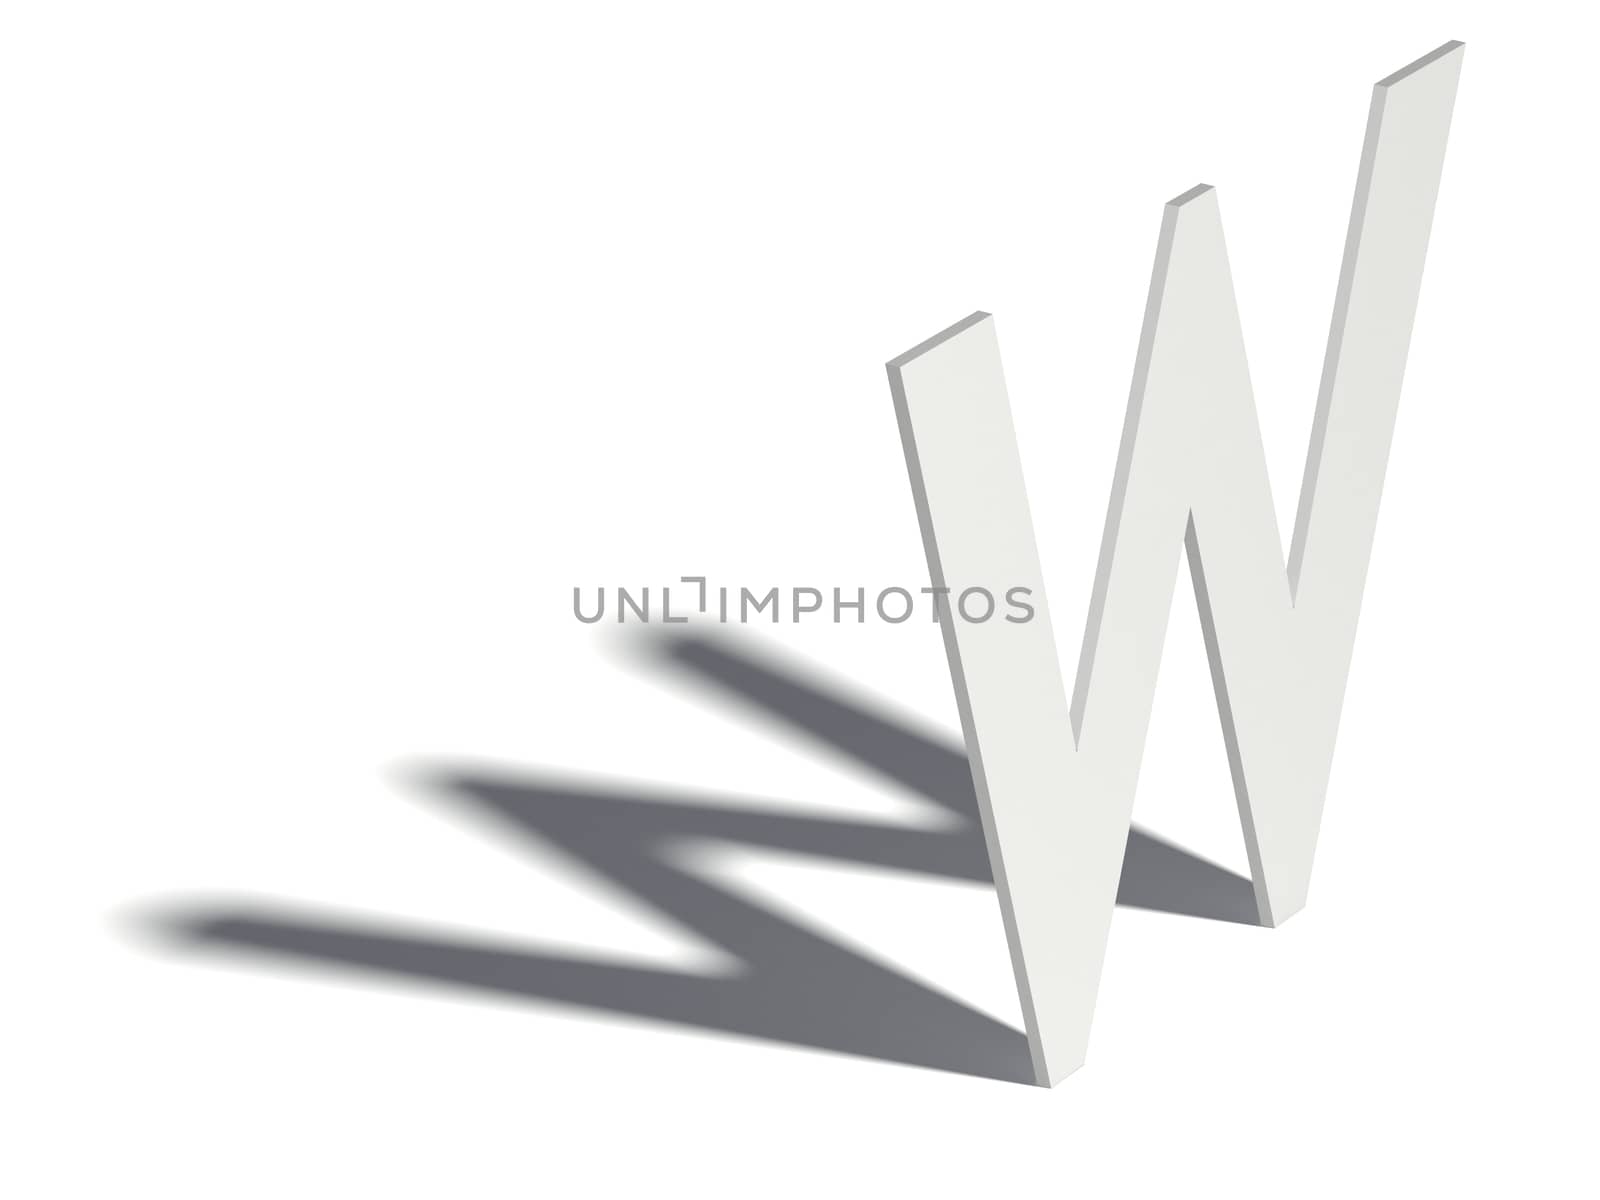 Drop shadow font. Letter W. 3D render illustration isolated on white background